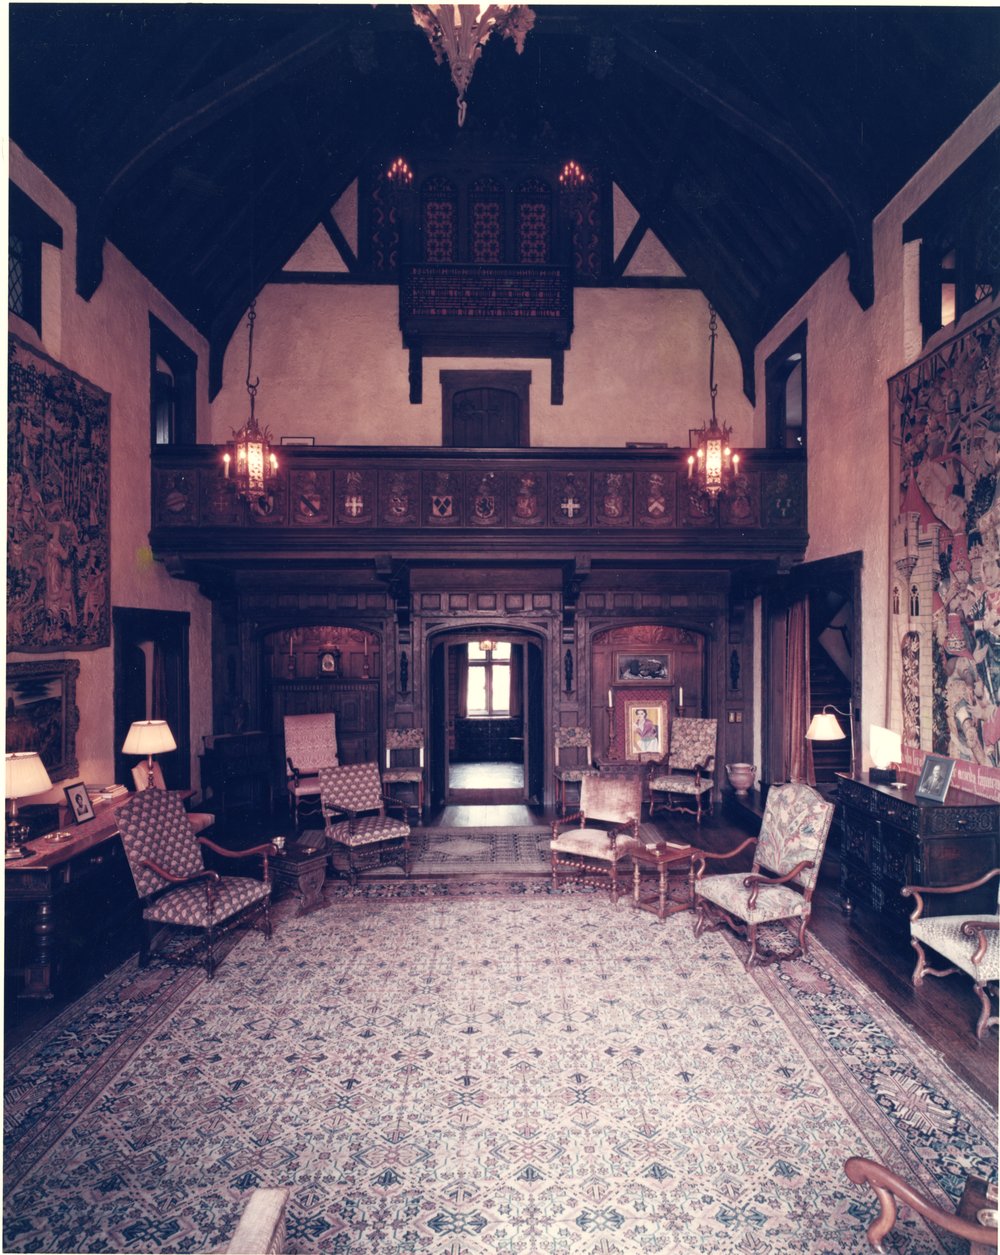 View of the balcony and organ loft (ft. an intricately detailed centerpiece rug), ca. 1960s